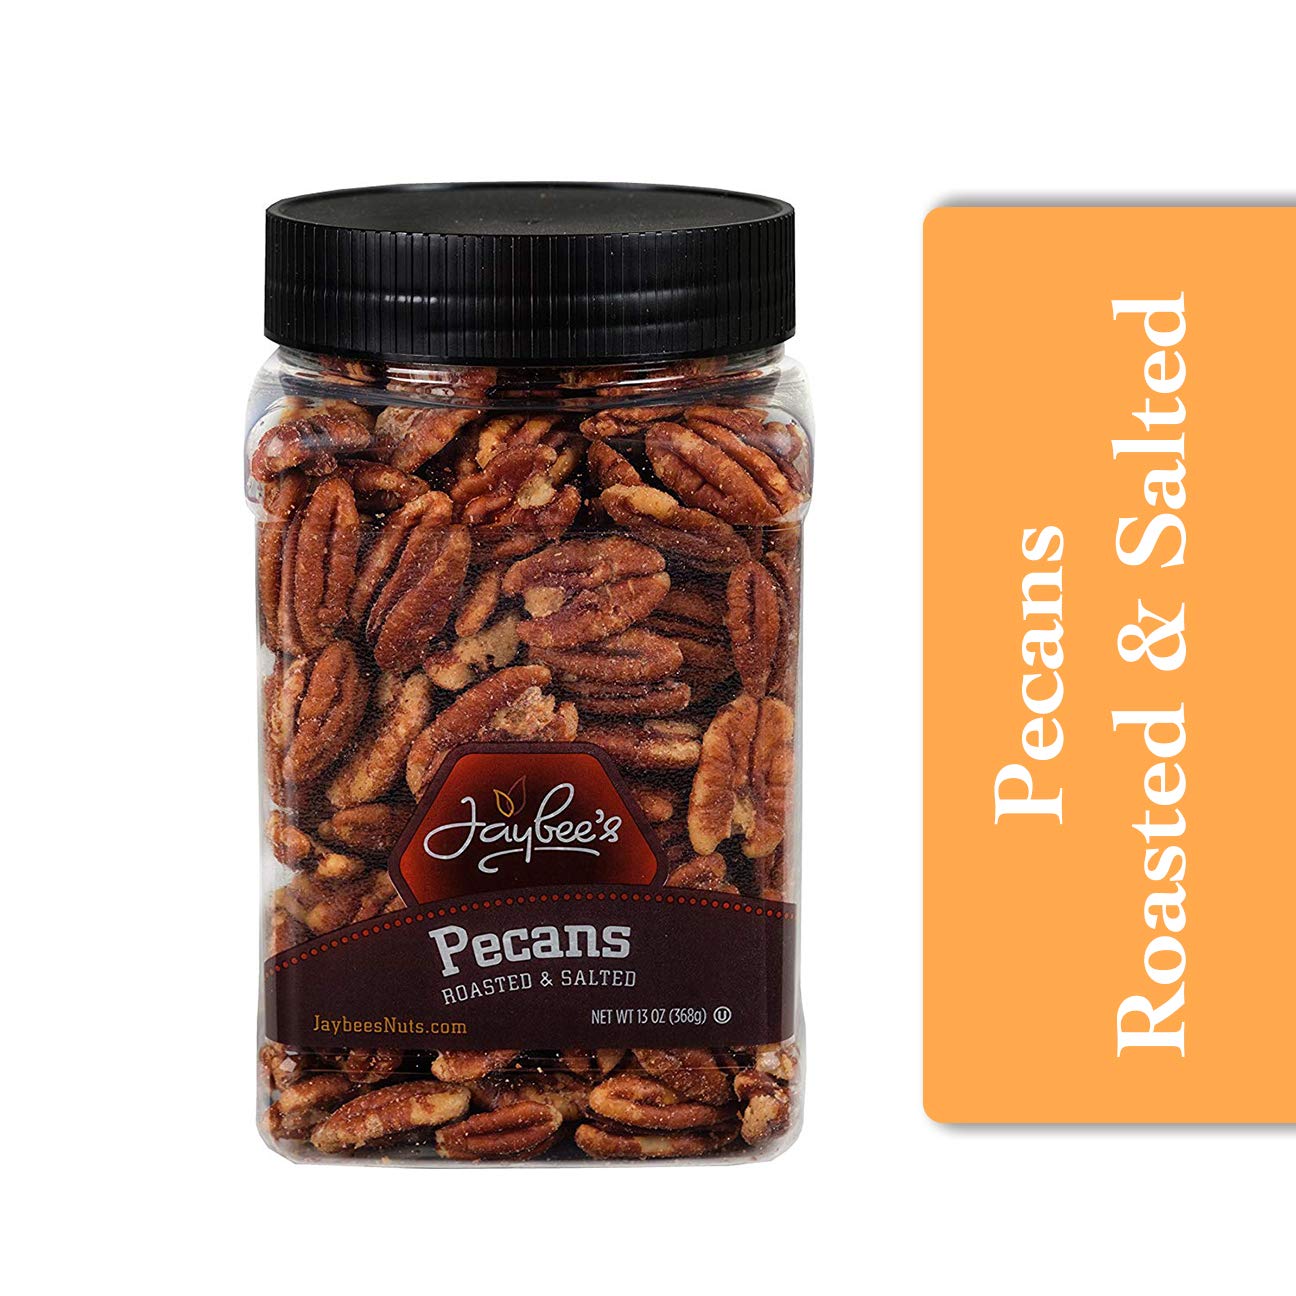 Book Cover Pecans Whole Roasted Salted - 13oz Reusable Container | Rich in Antioxidants | Low Carbs | Vegan | Keto Friendly | Certified Kosher | Great for Gift Giving, Baking, Cooking or Everyday Healthy Snack 13 Ounce (Pack of 1)